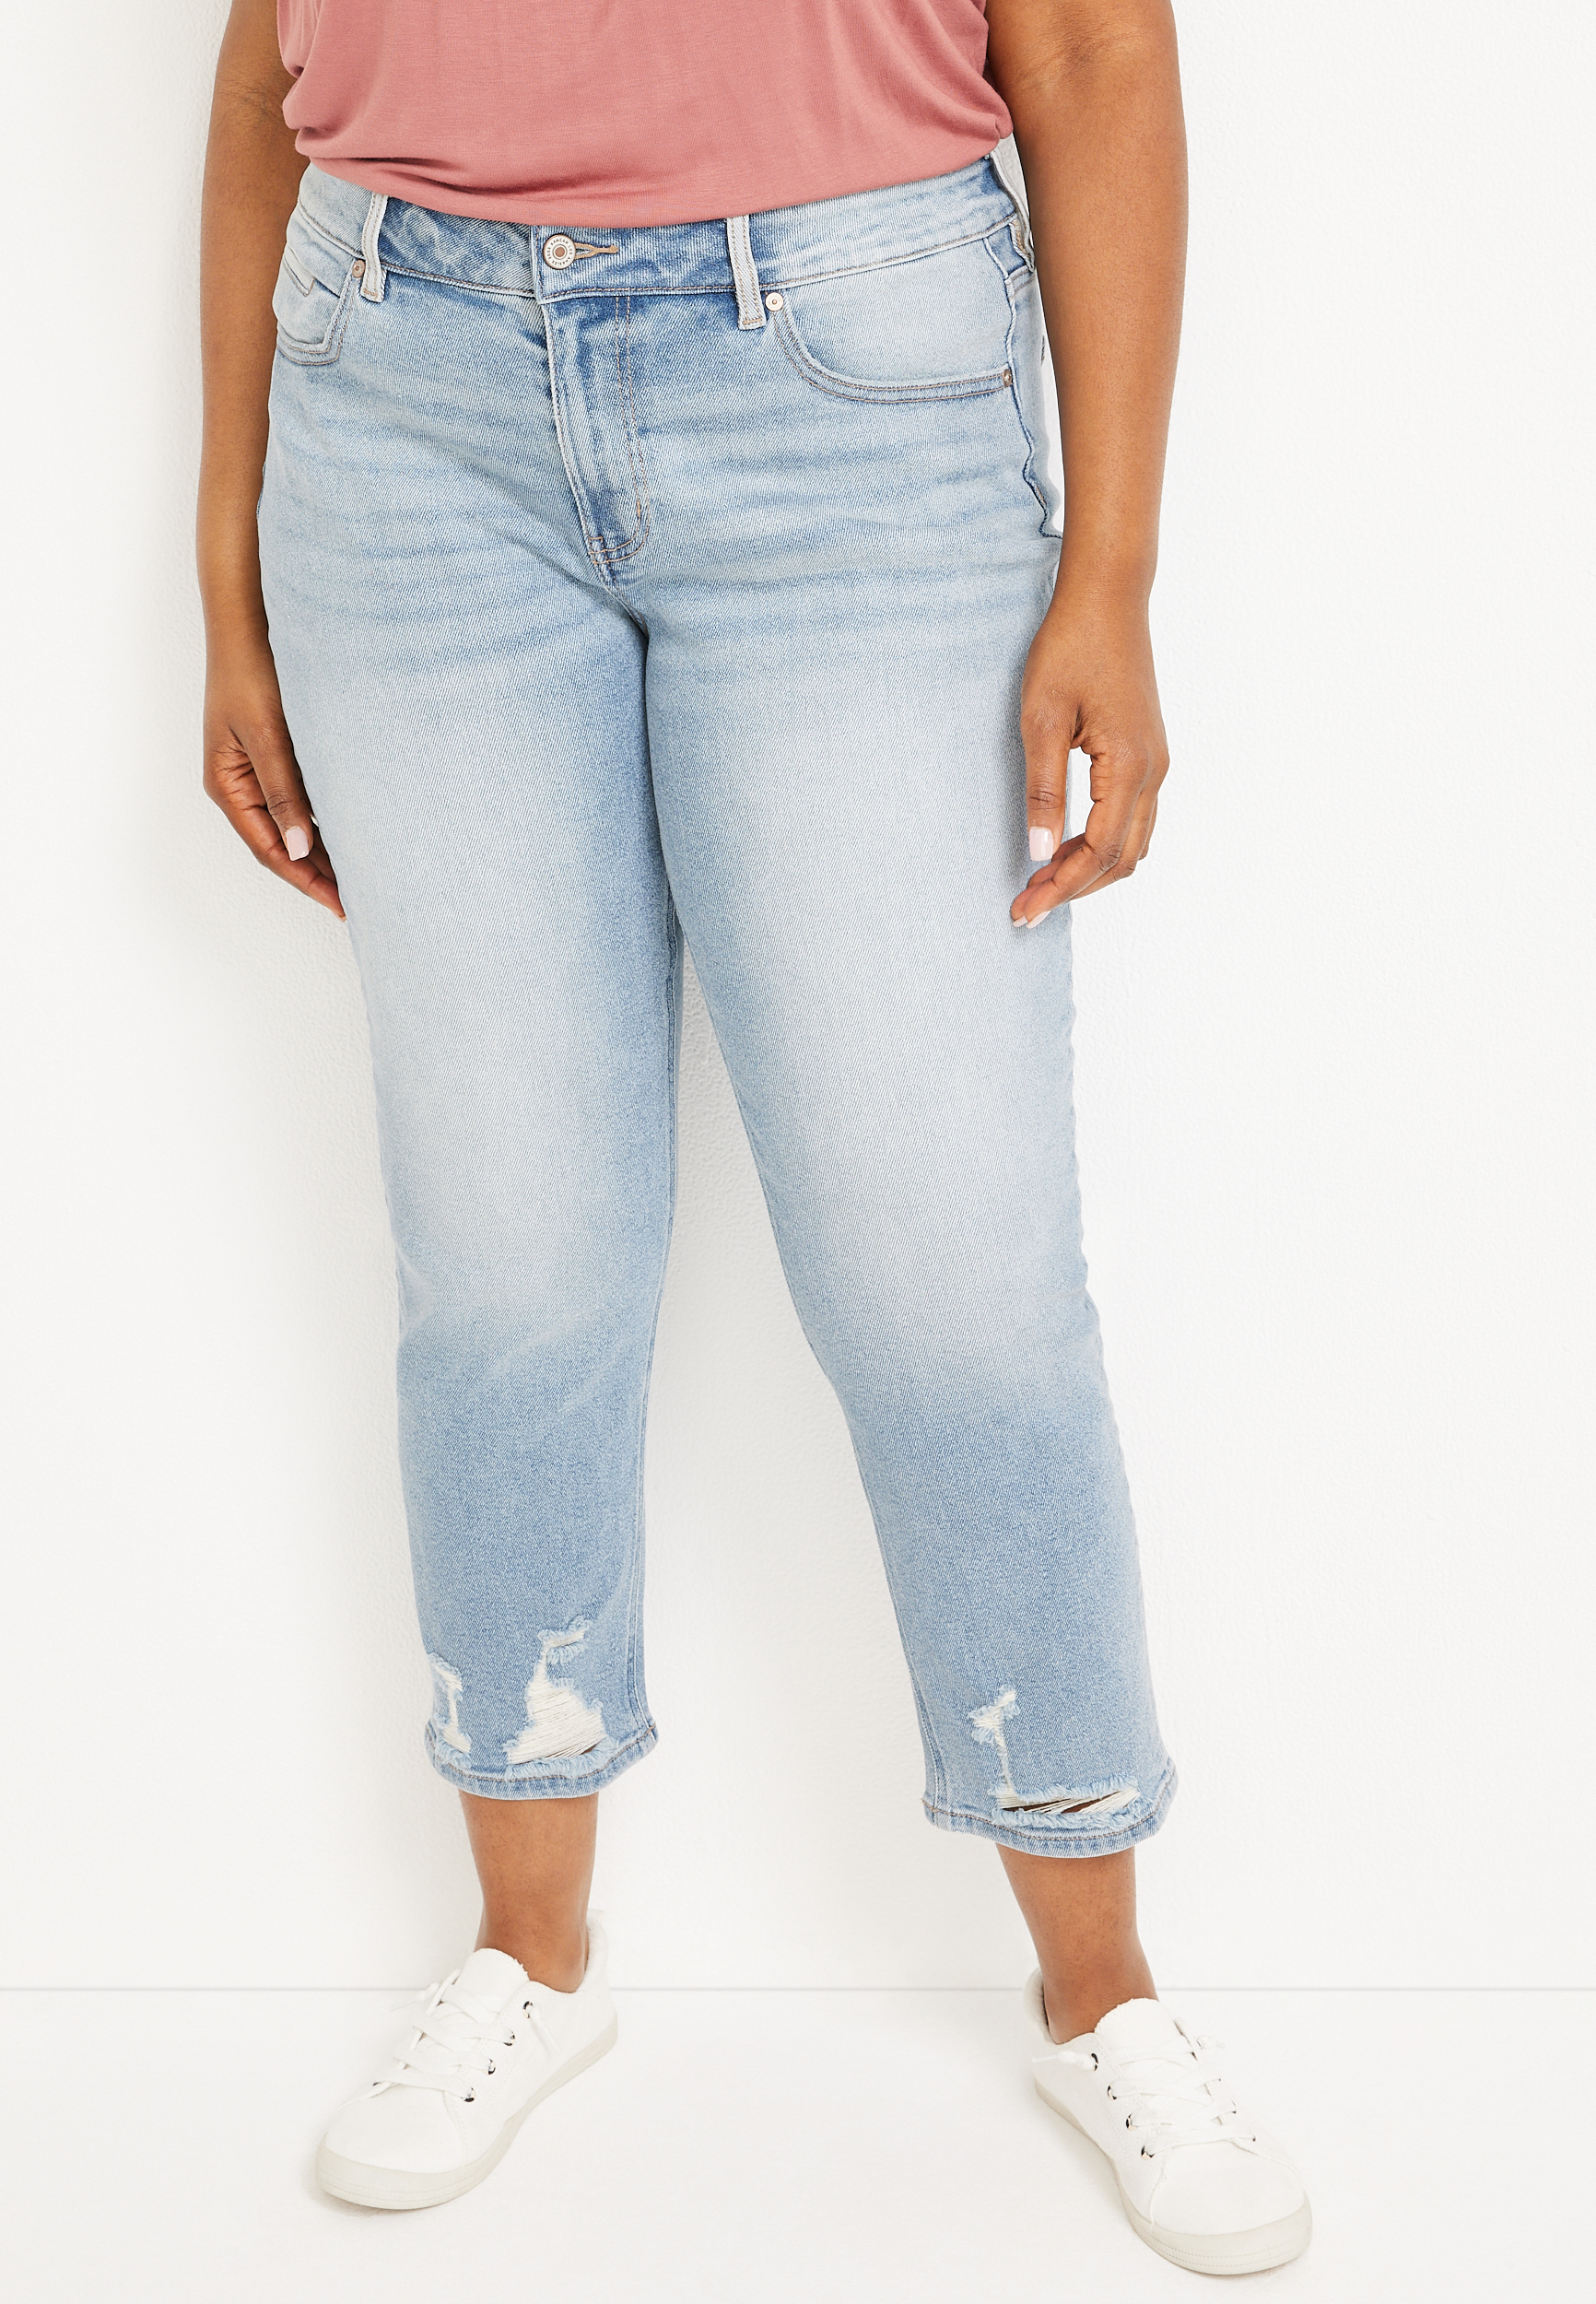 Plus Size KanCan™ Boyfriend Mid Rise Ripped Ankle Jean | maurices